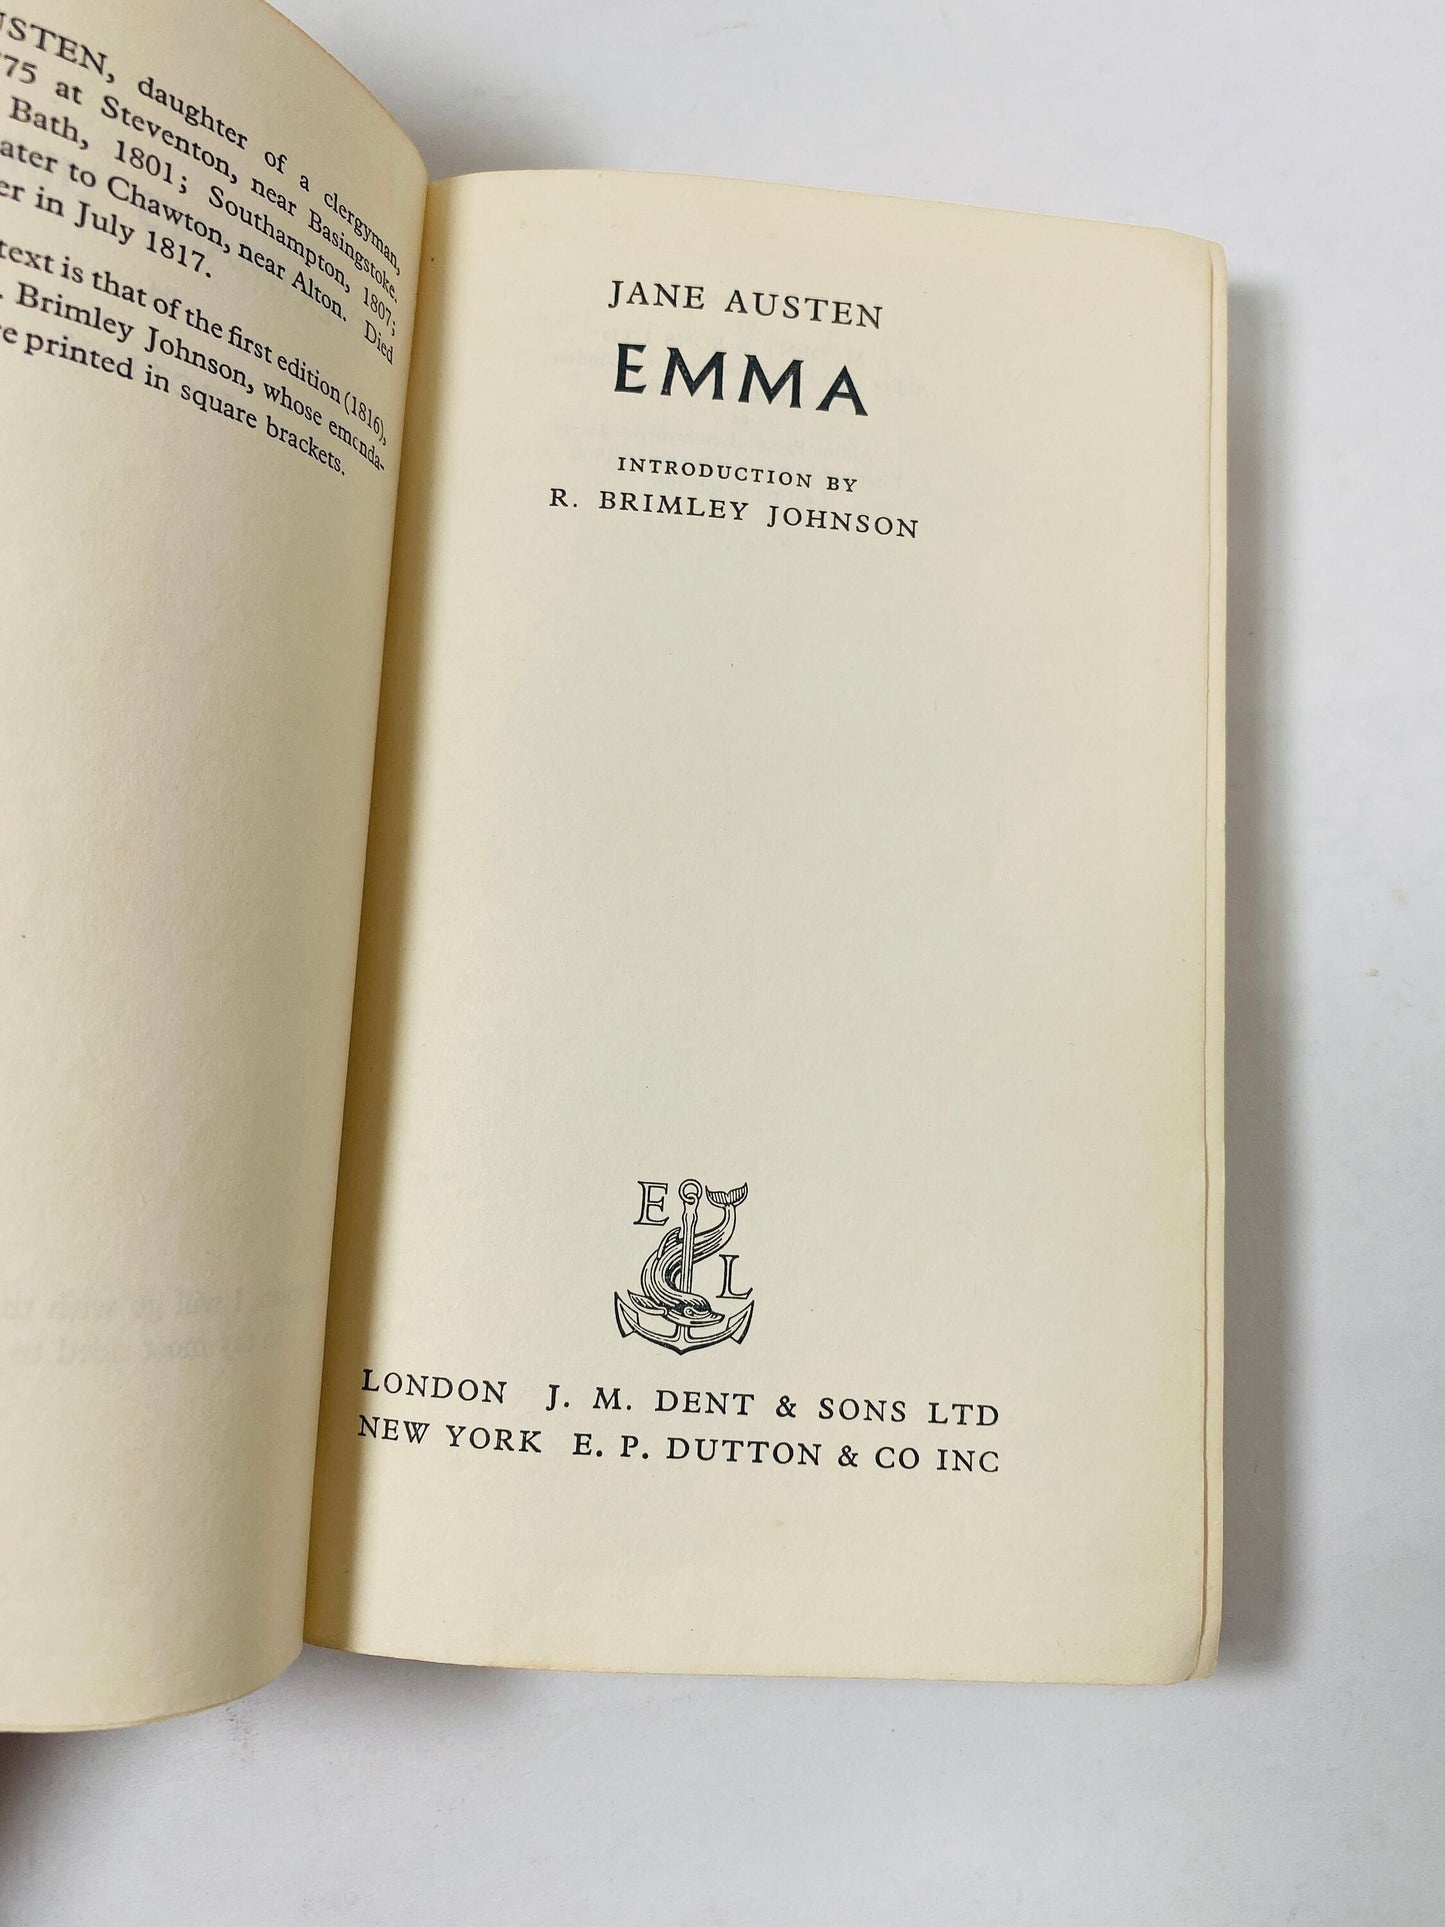 Emma by Jane Austen circa 1955 Vintage red cloth bound book detailing love, romance and broken engagements. Beautiful book lover gift